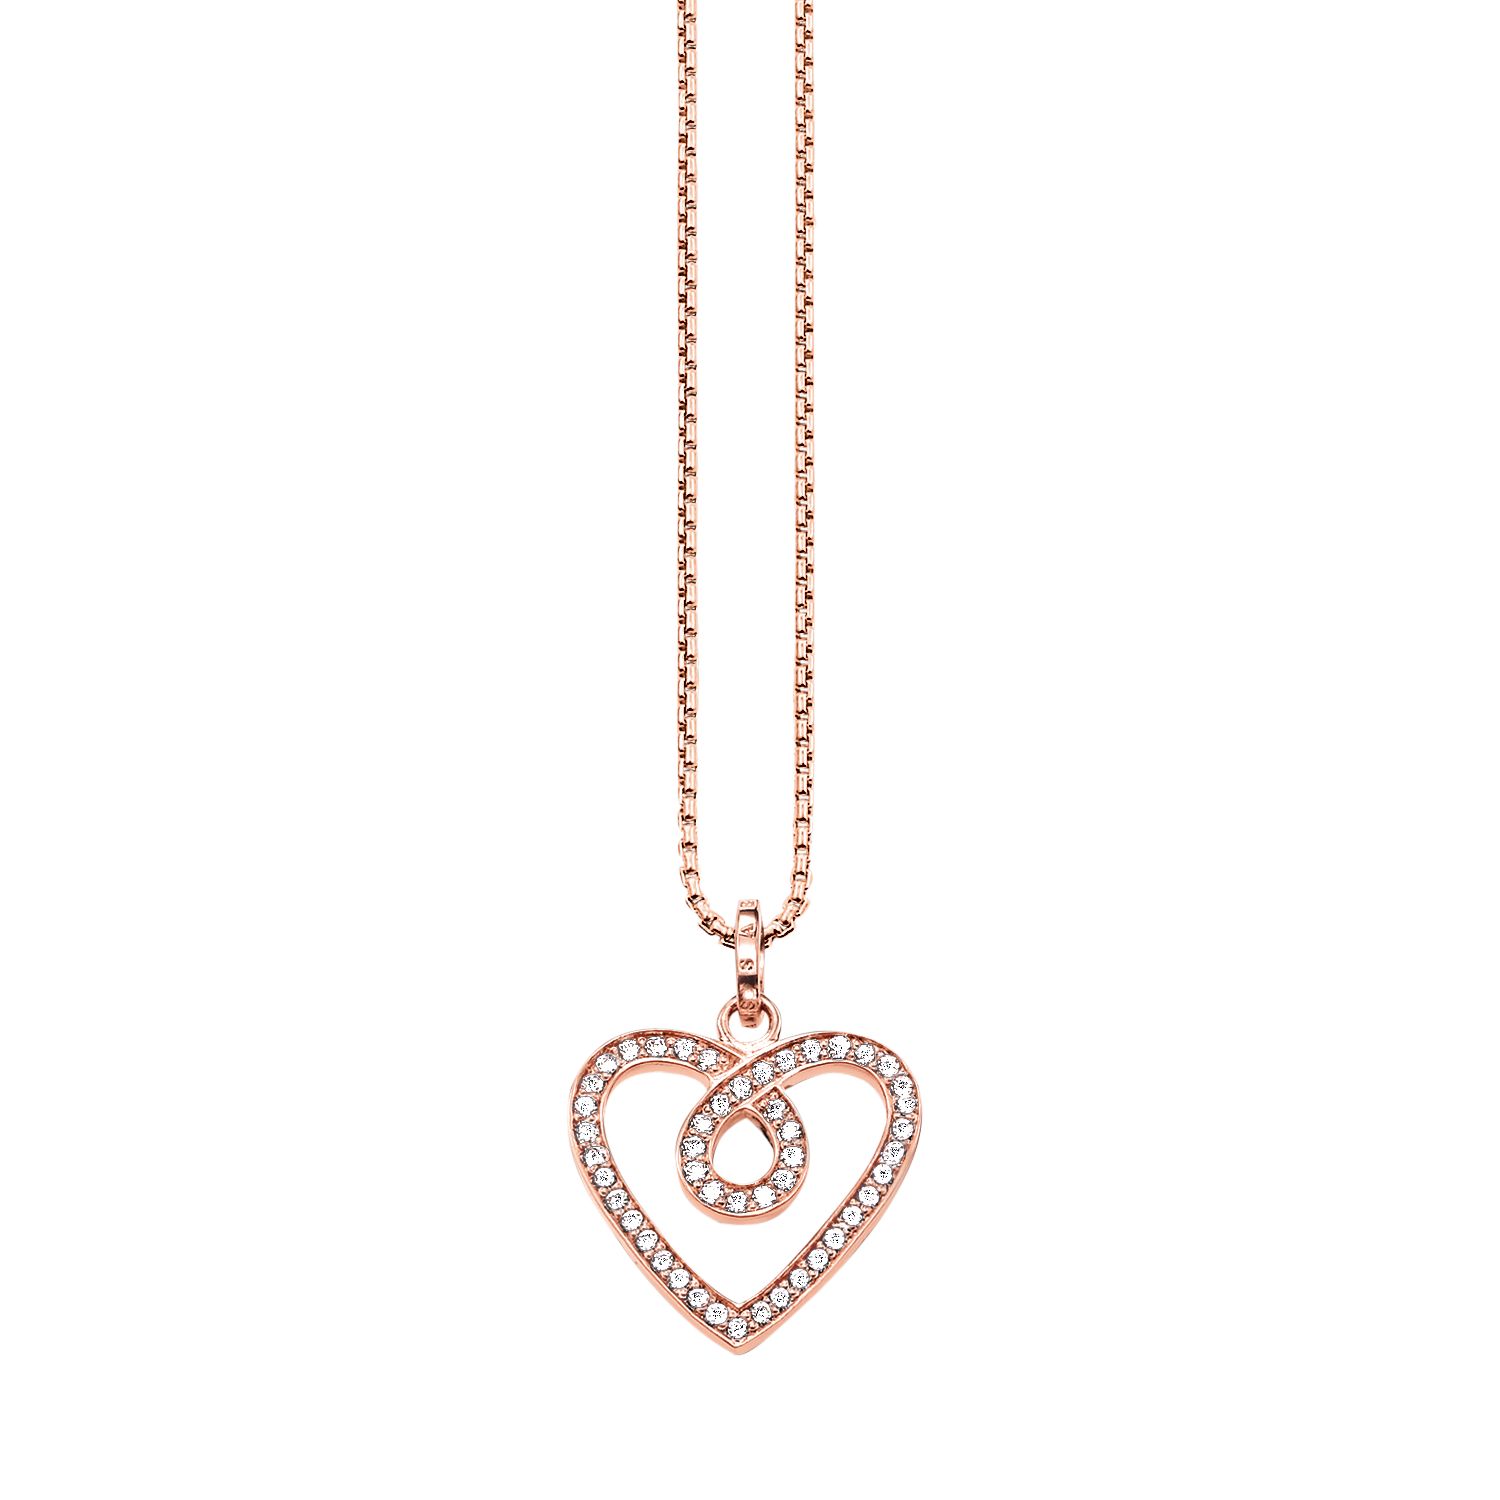 THOMAS SABO Glam & Soul Infinity Heart Necklace at John Lewis & Partners